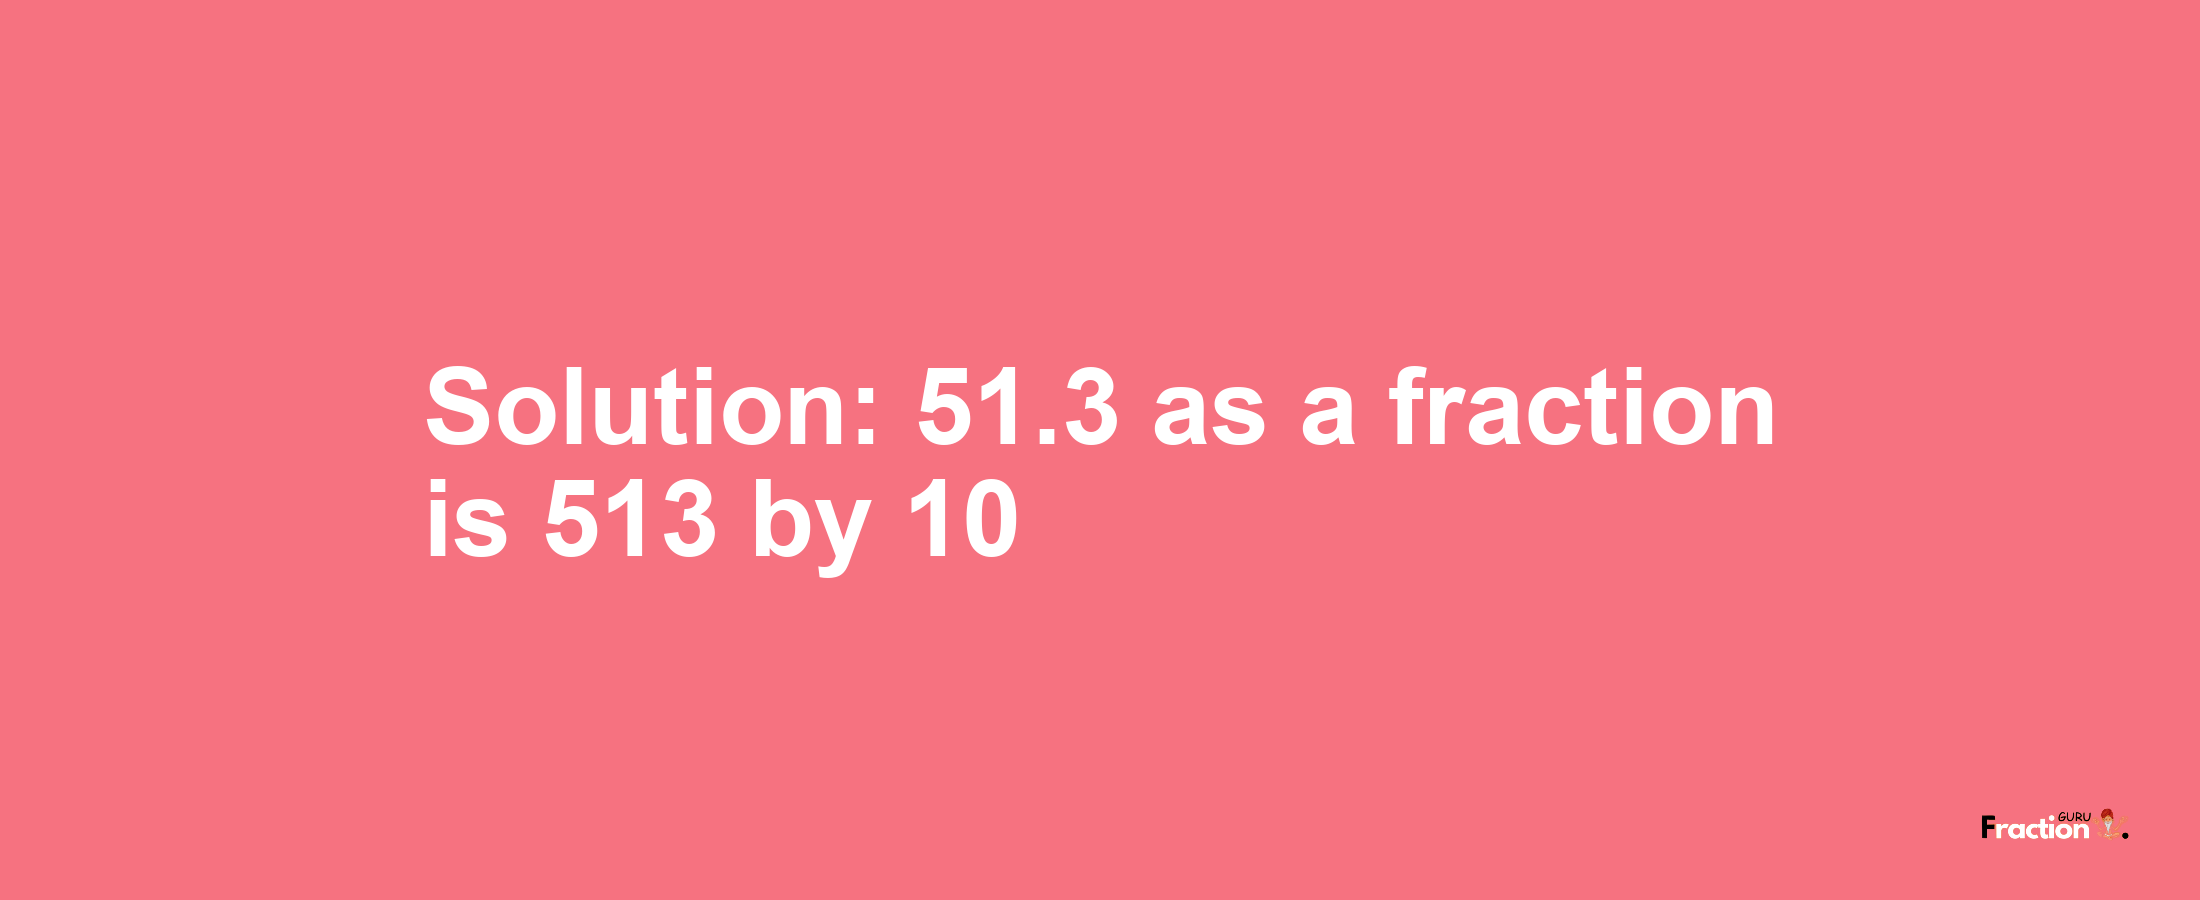 Solution:51.3 as a fraction is 513/10